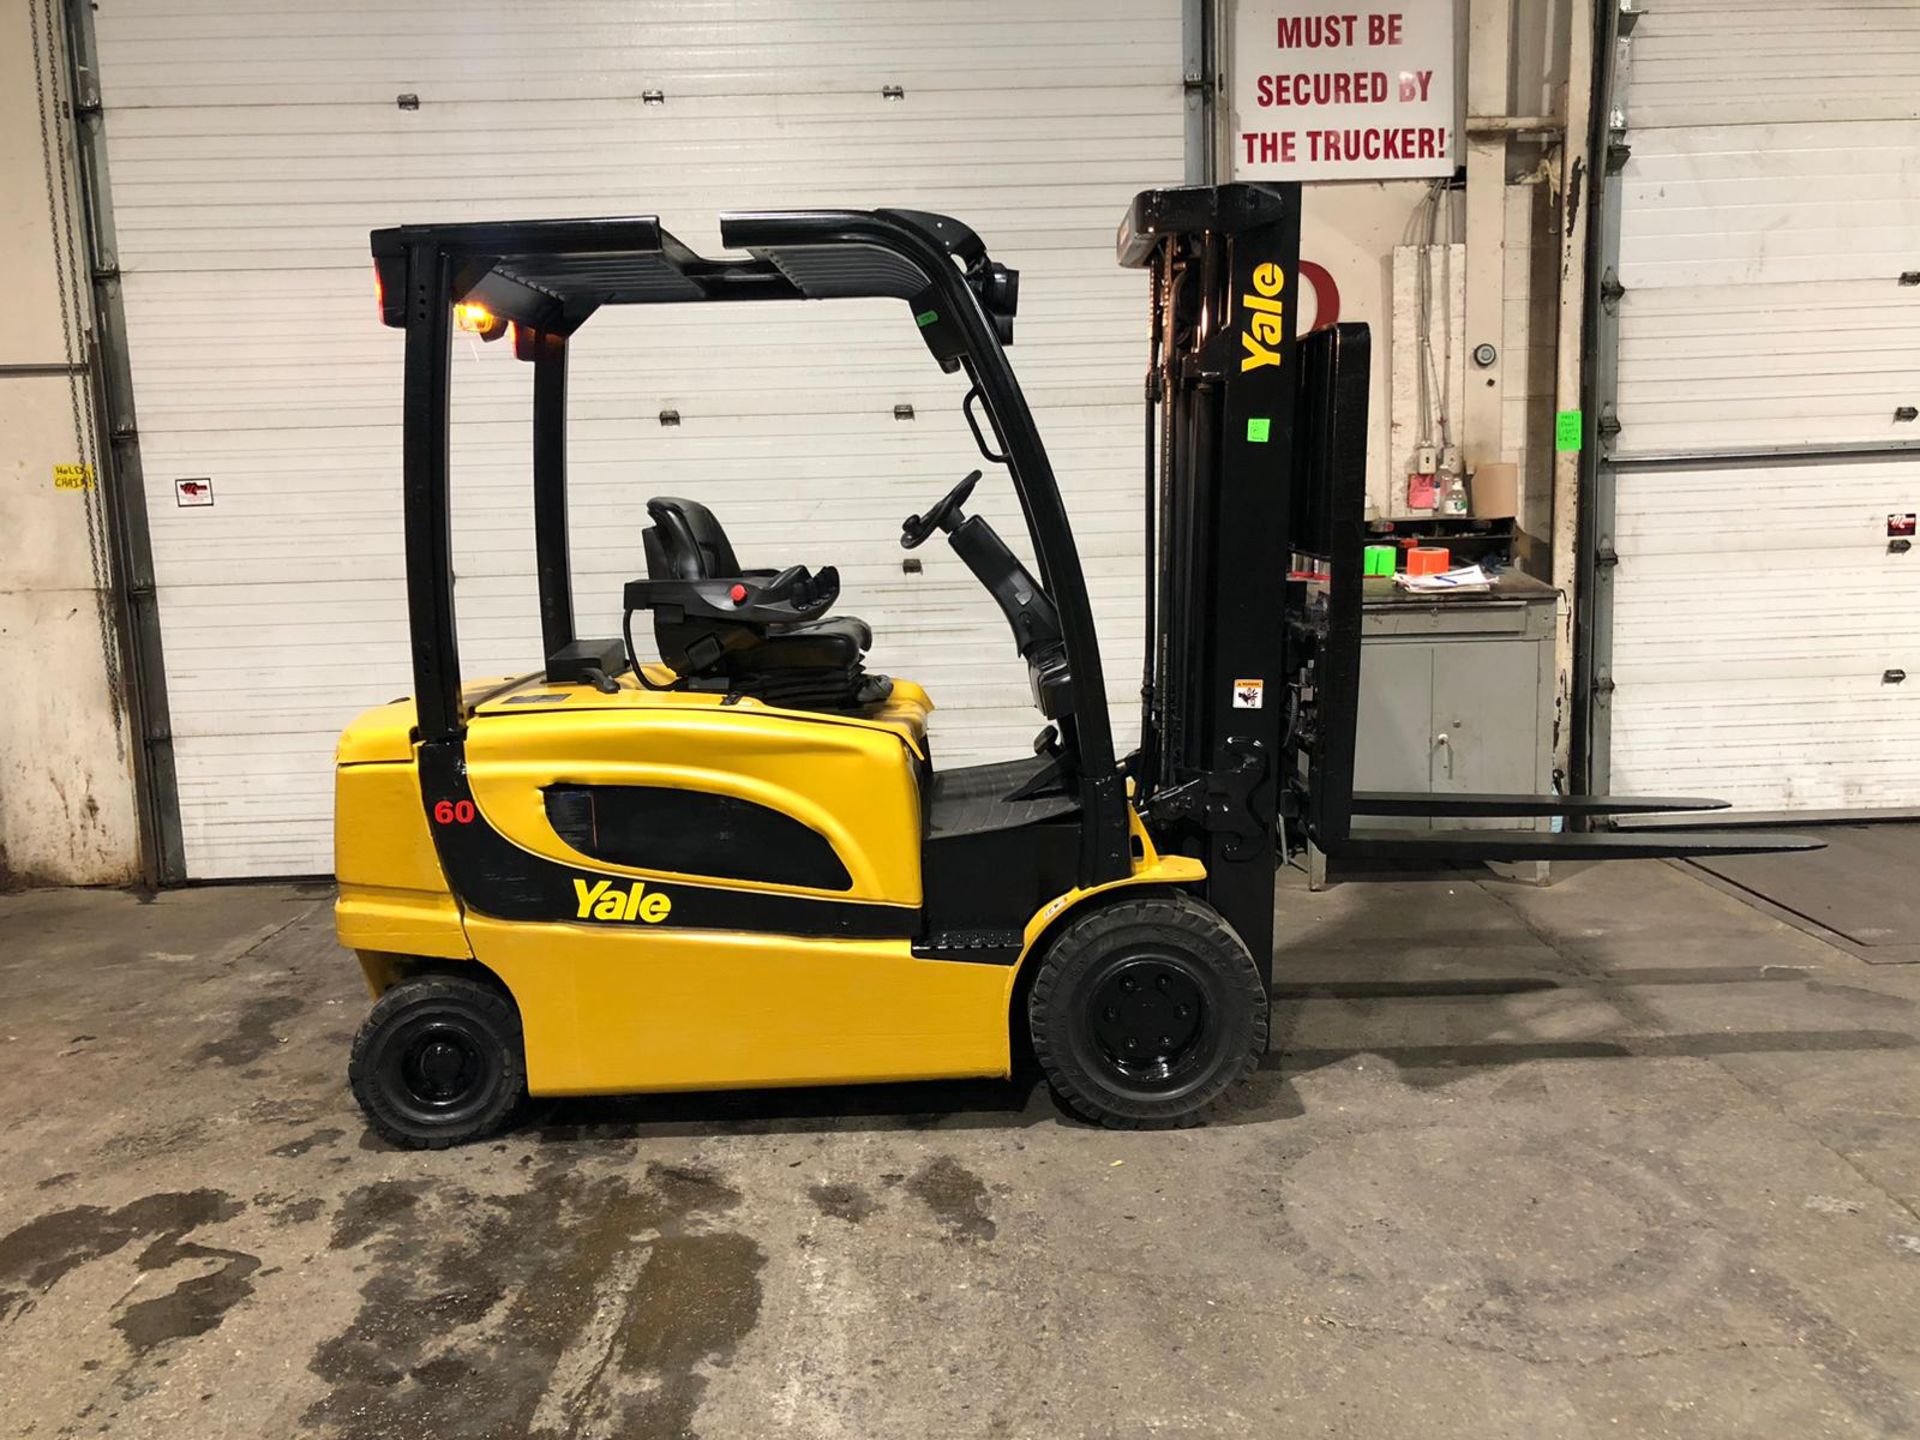 MINT 2019 Yale 6,000lbs Capacity Forklift INDOOR / OUTDOOR Electric 80V with Sideshift - Image 6 of 6